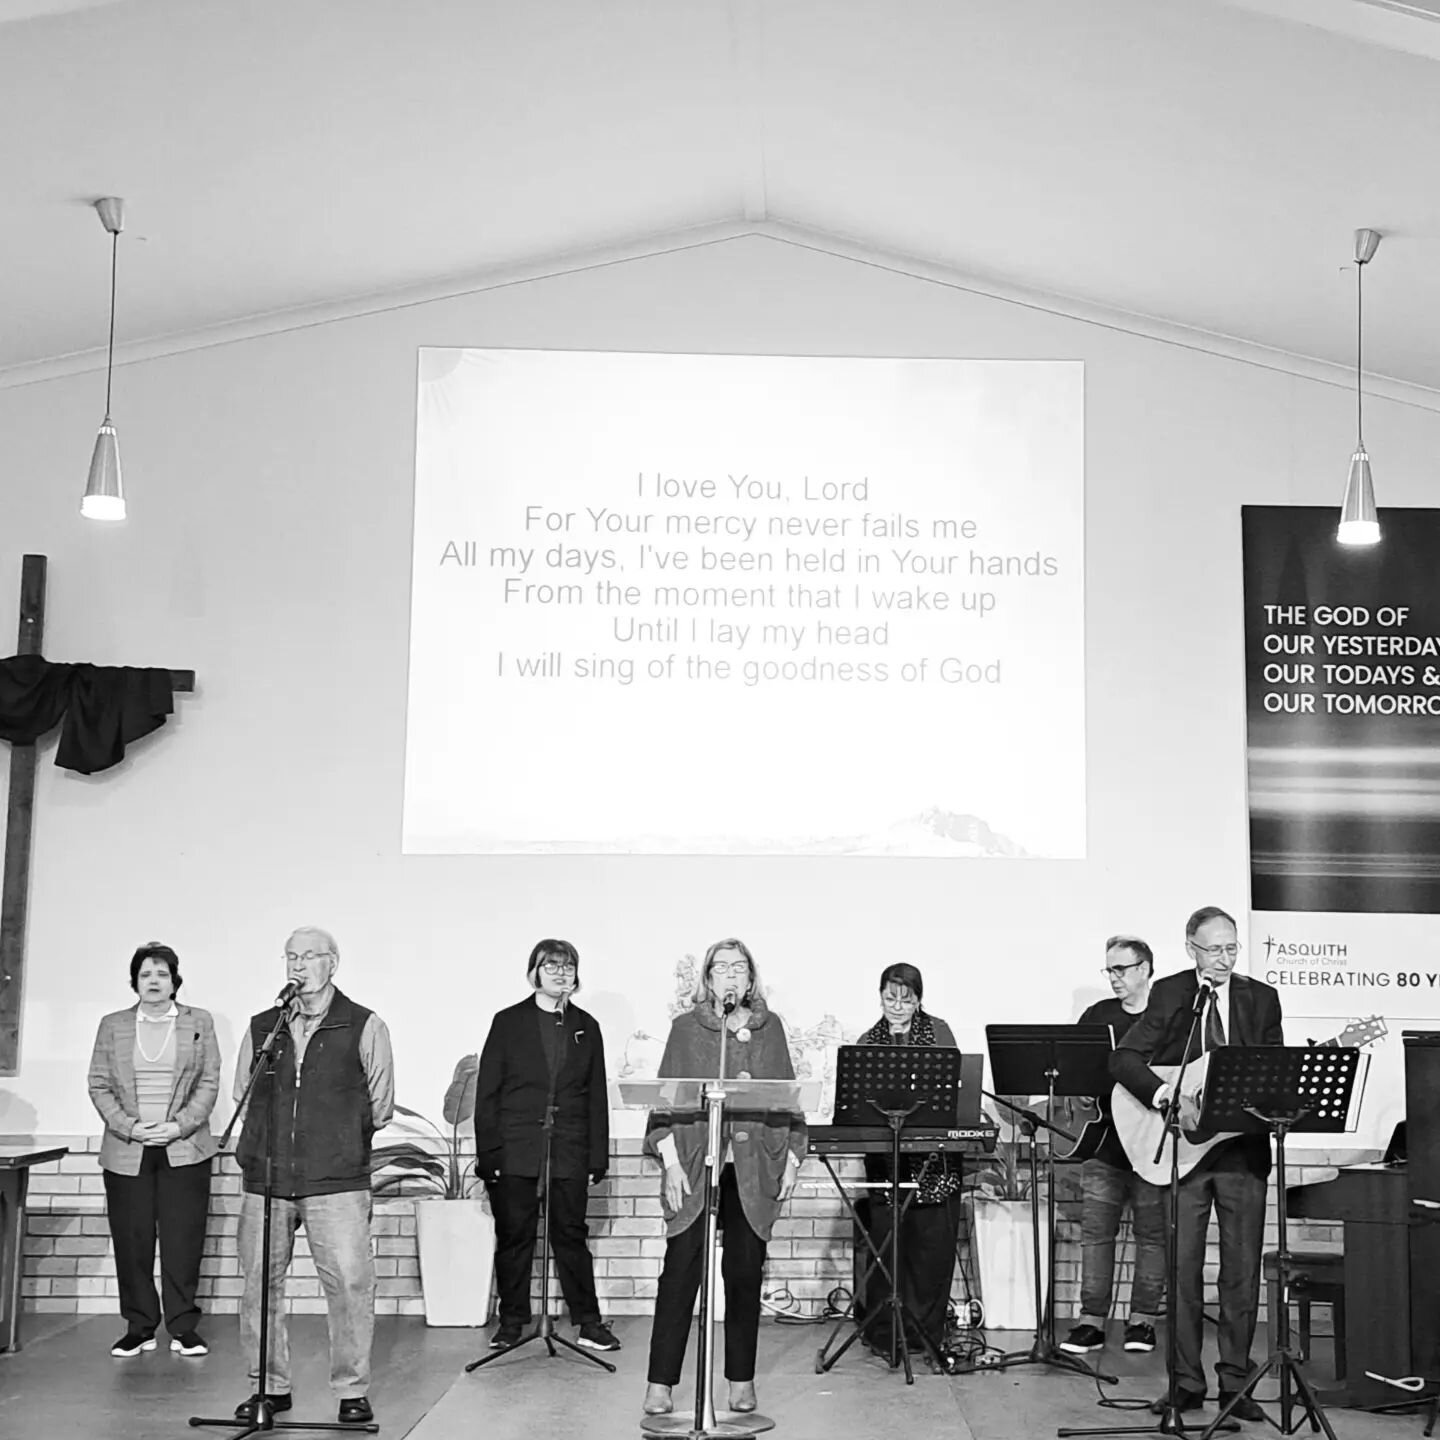 Grateful for this team bringing us worship on a Sunday ☆